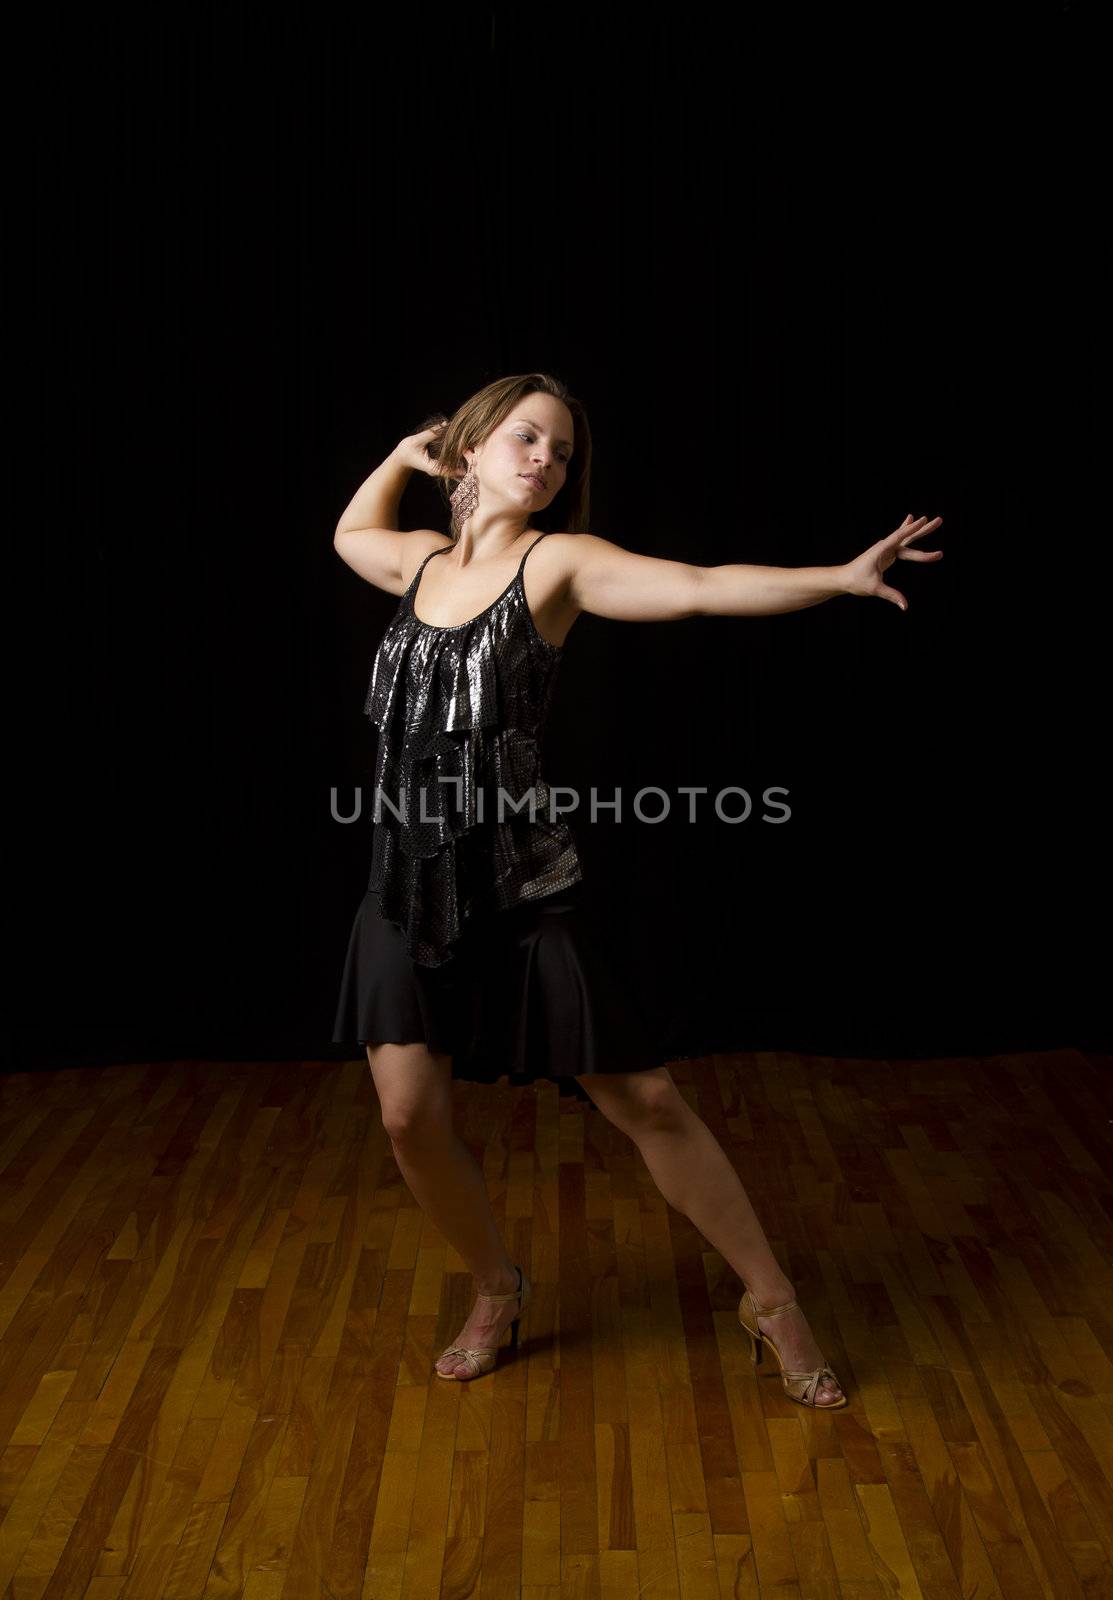 Young dancer in the middle of a pose